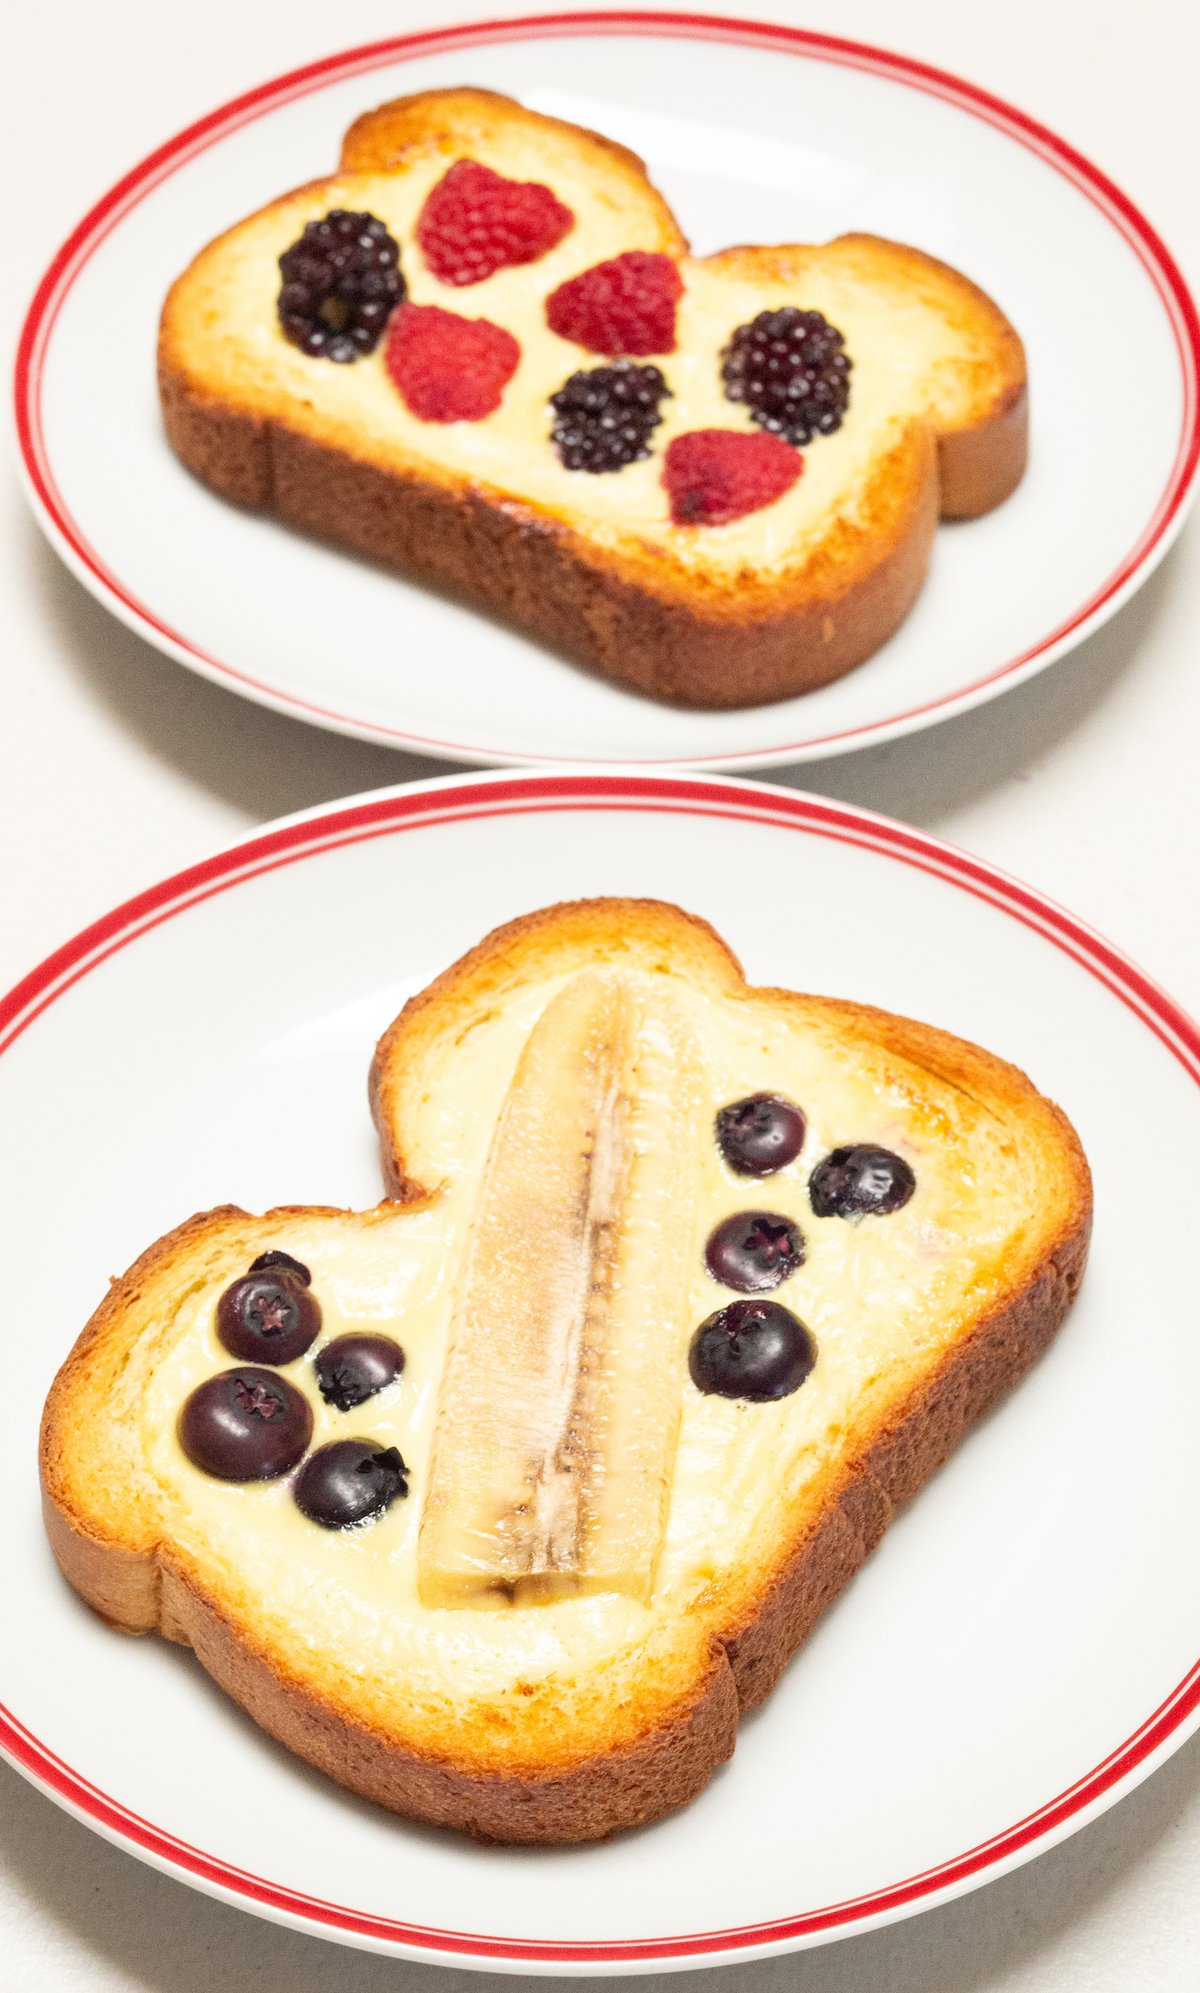 Two dinner plates each with a slice of yogurt custard toast topped with fresh fruit.